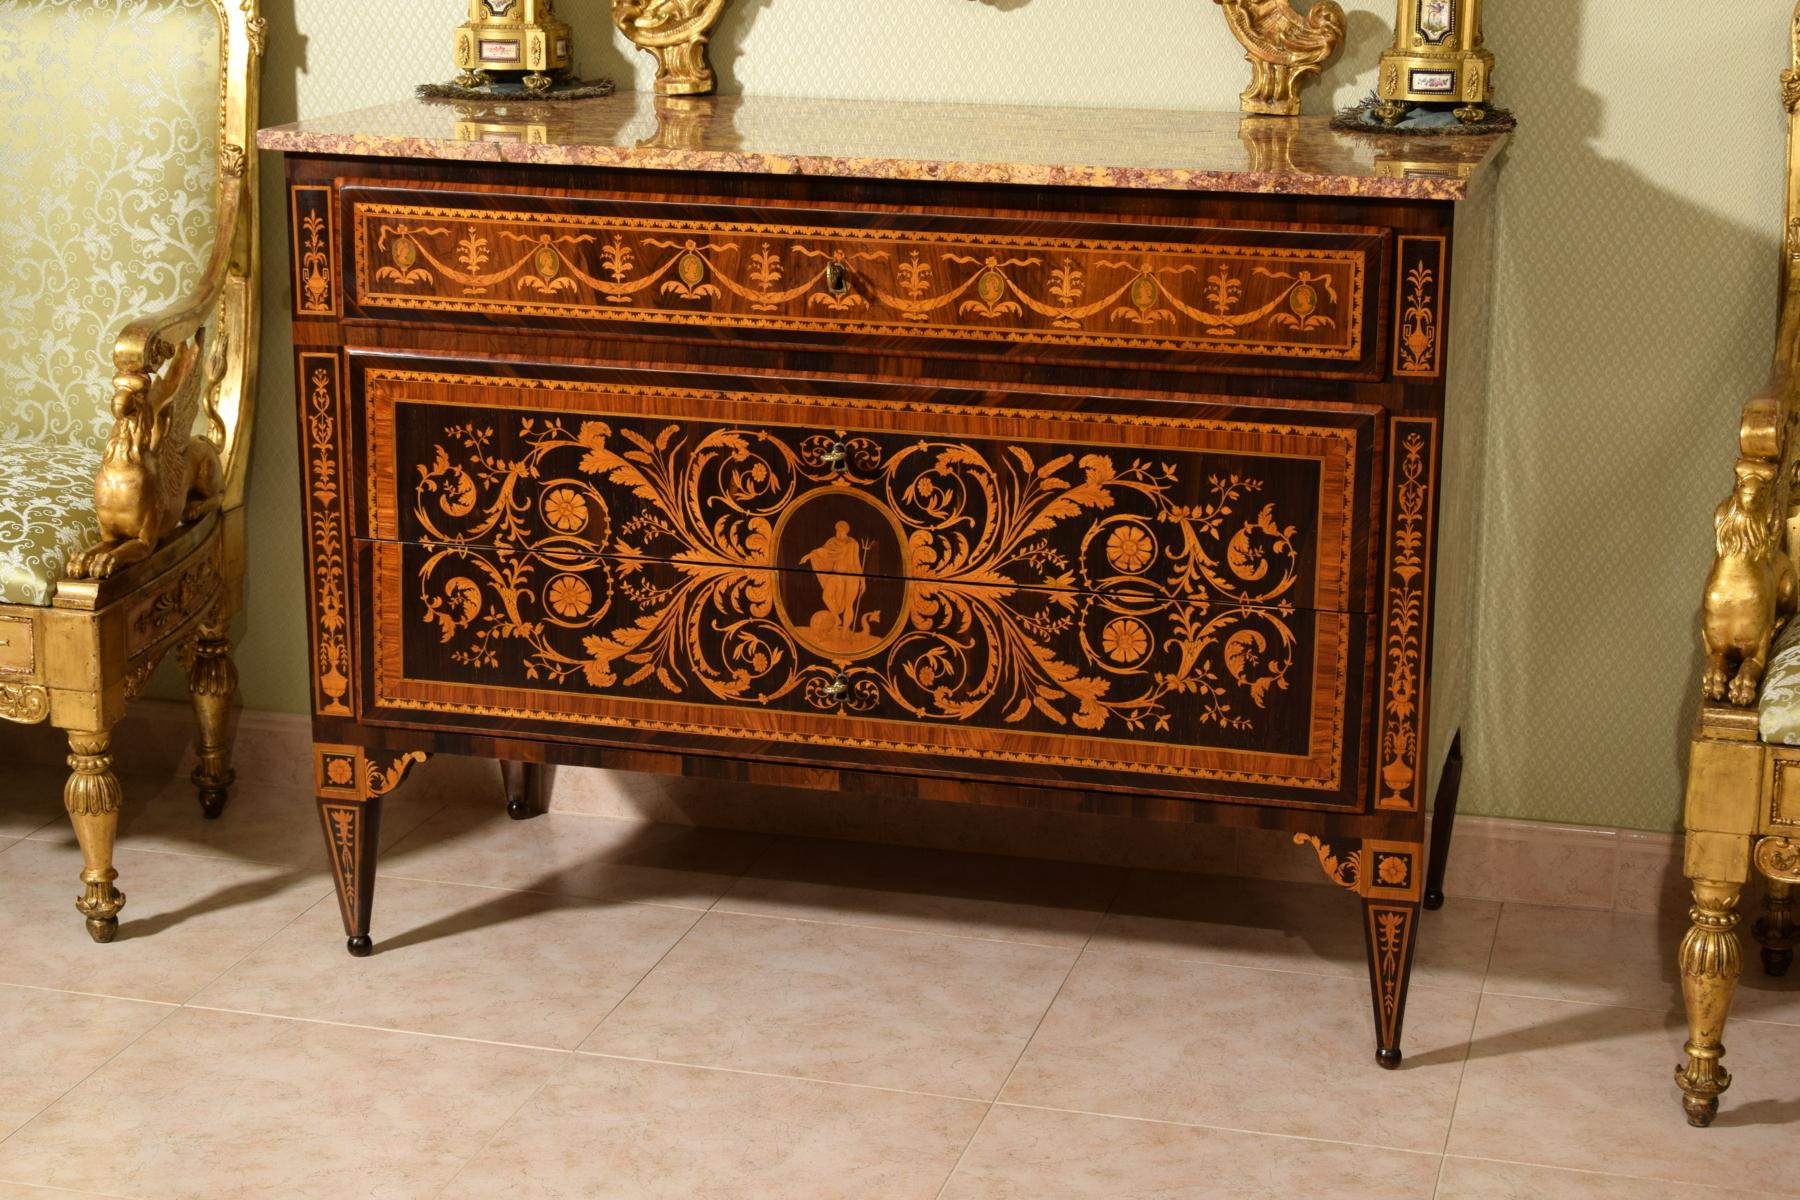 18th century, neoclassical Italian inlay wood chest of drawers

This refined neoclassical chest of drawers was built around the end of the 18th century in the Lombard area (north of Italy - Milan). The cabinet has two large drawers and a smaller